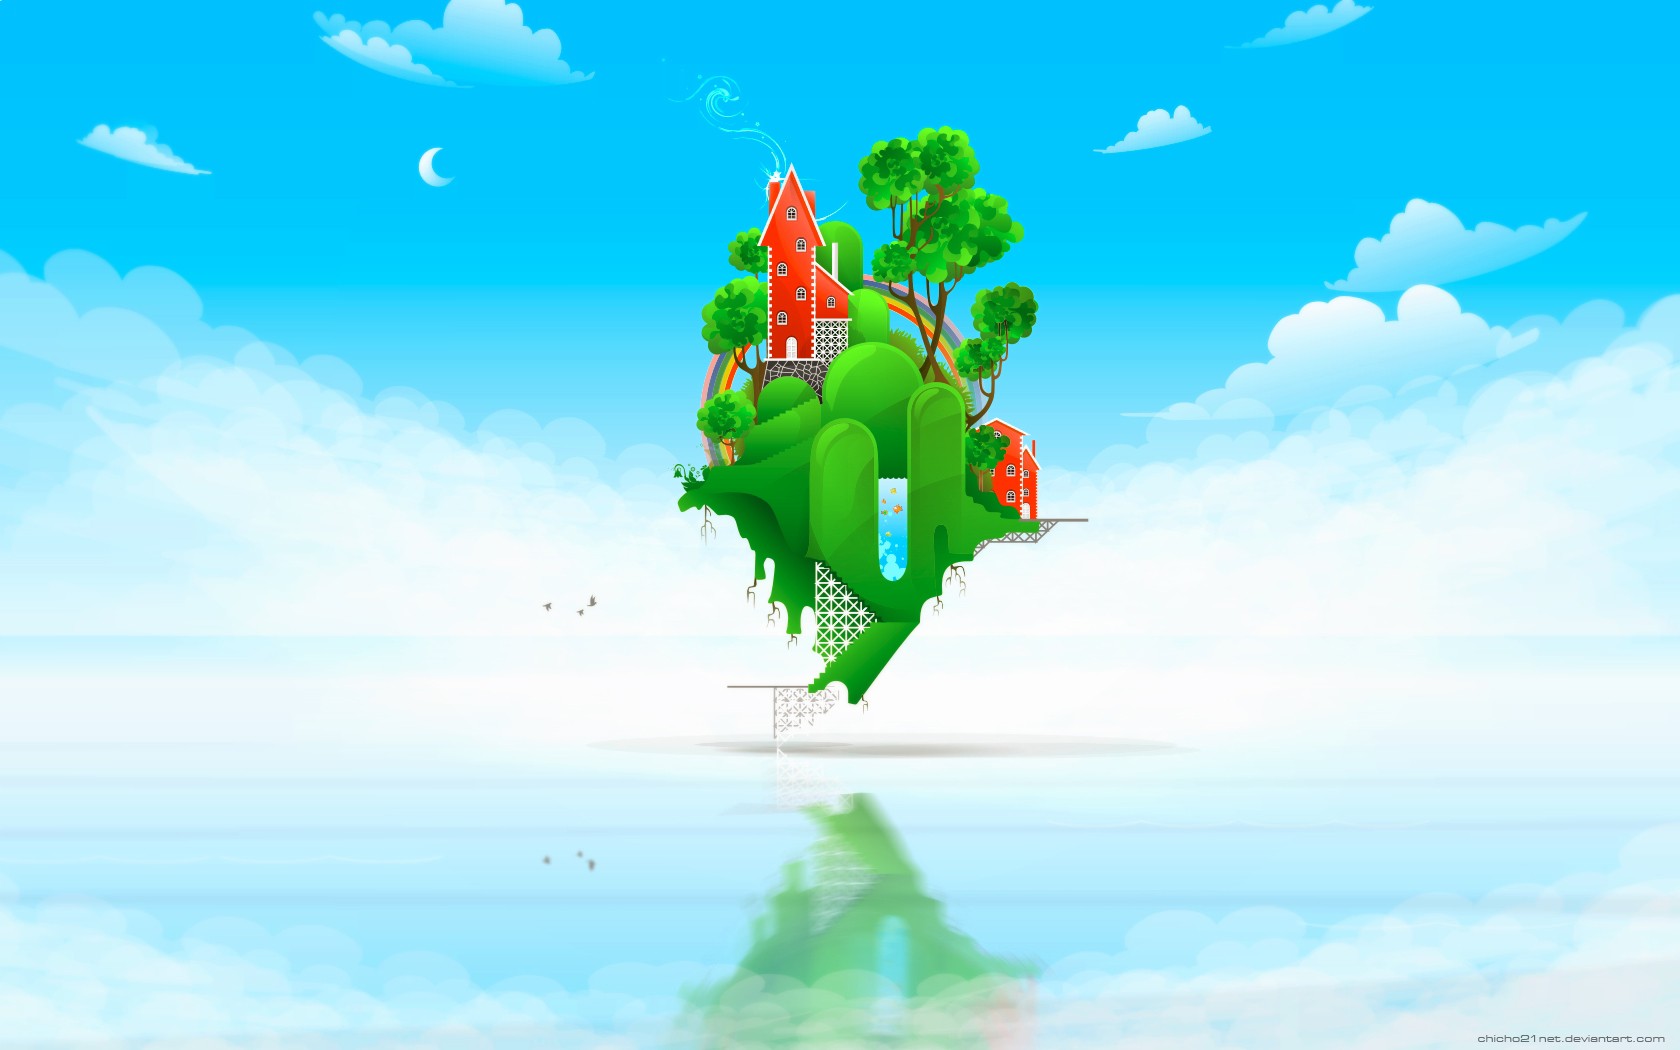 General 1680x1050 digital art artwork trees sky reflection nature house clouds